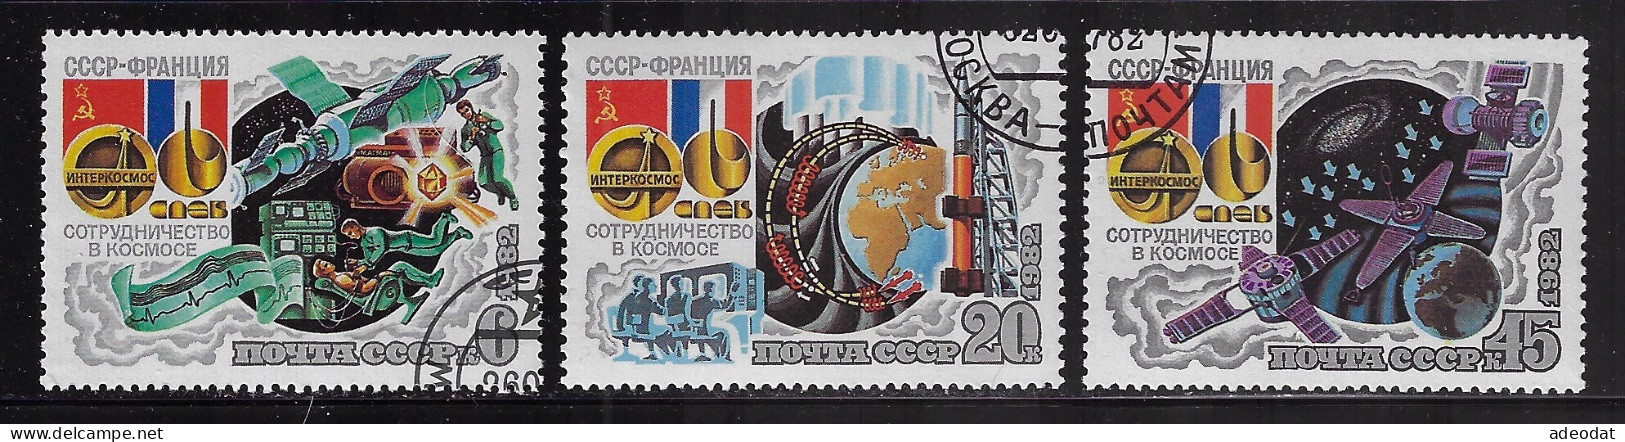 RUSSIA 1982 SCOTT #5059-5061  USED - Used Stamps